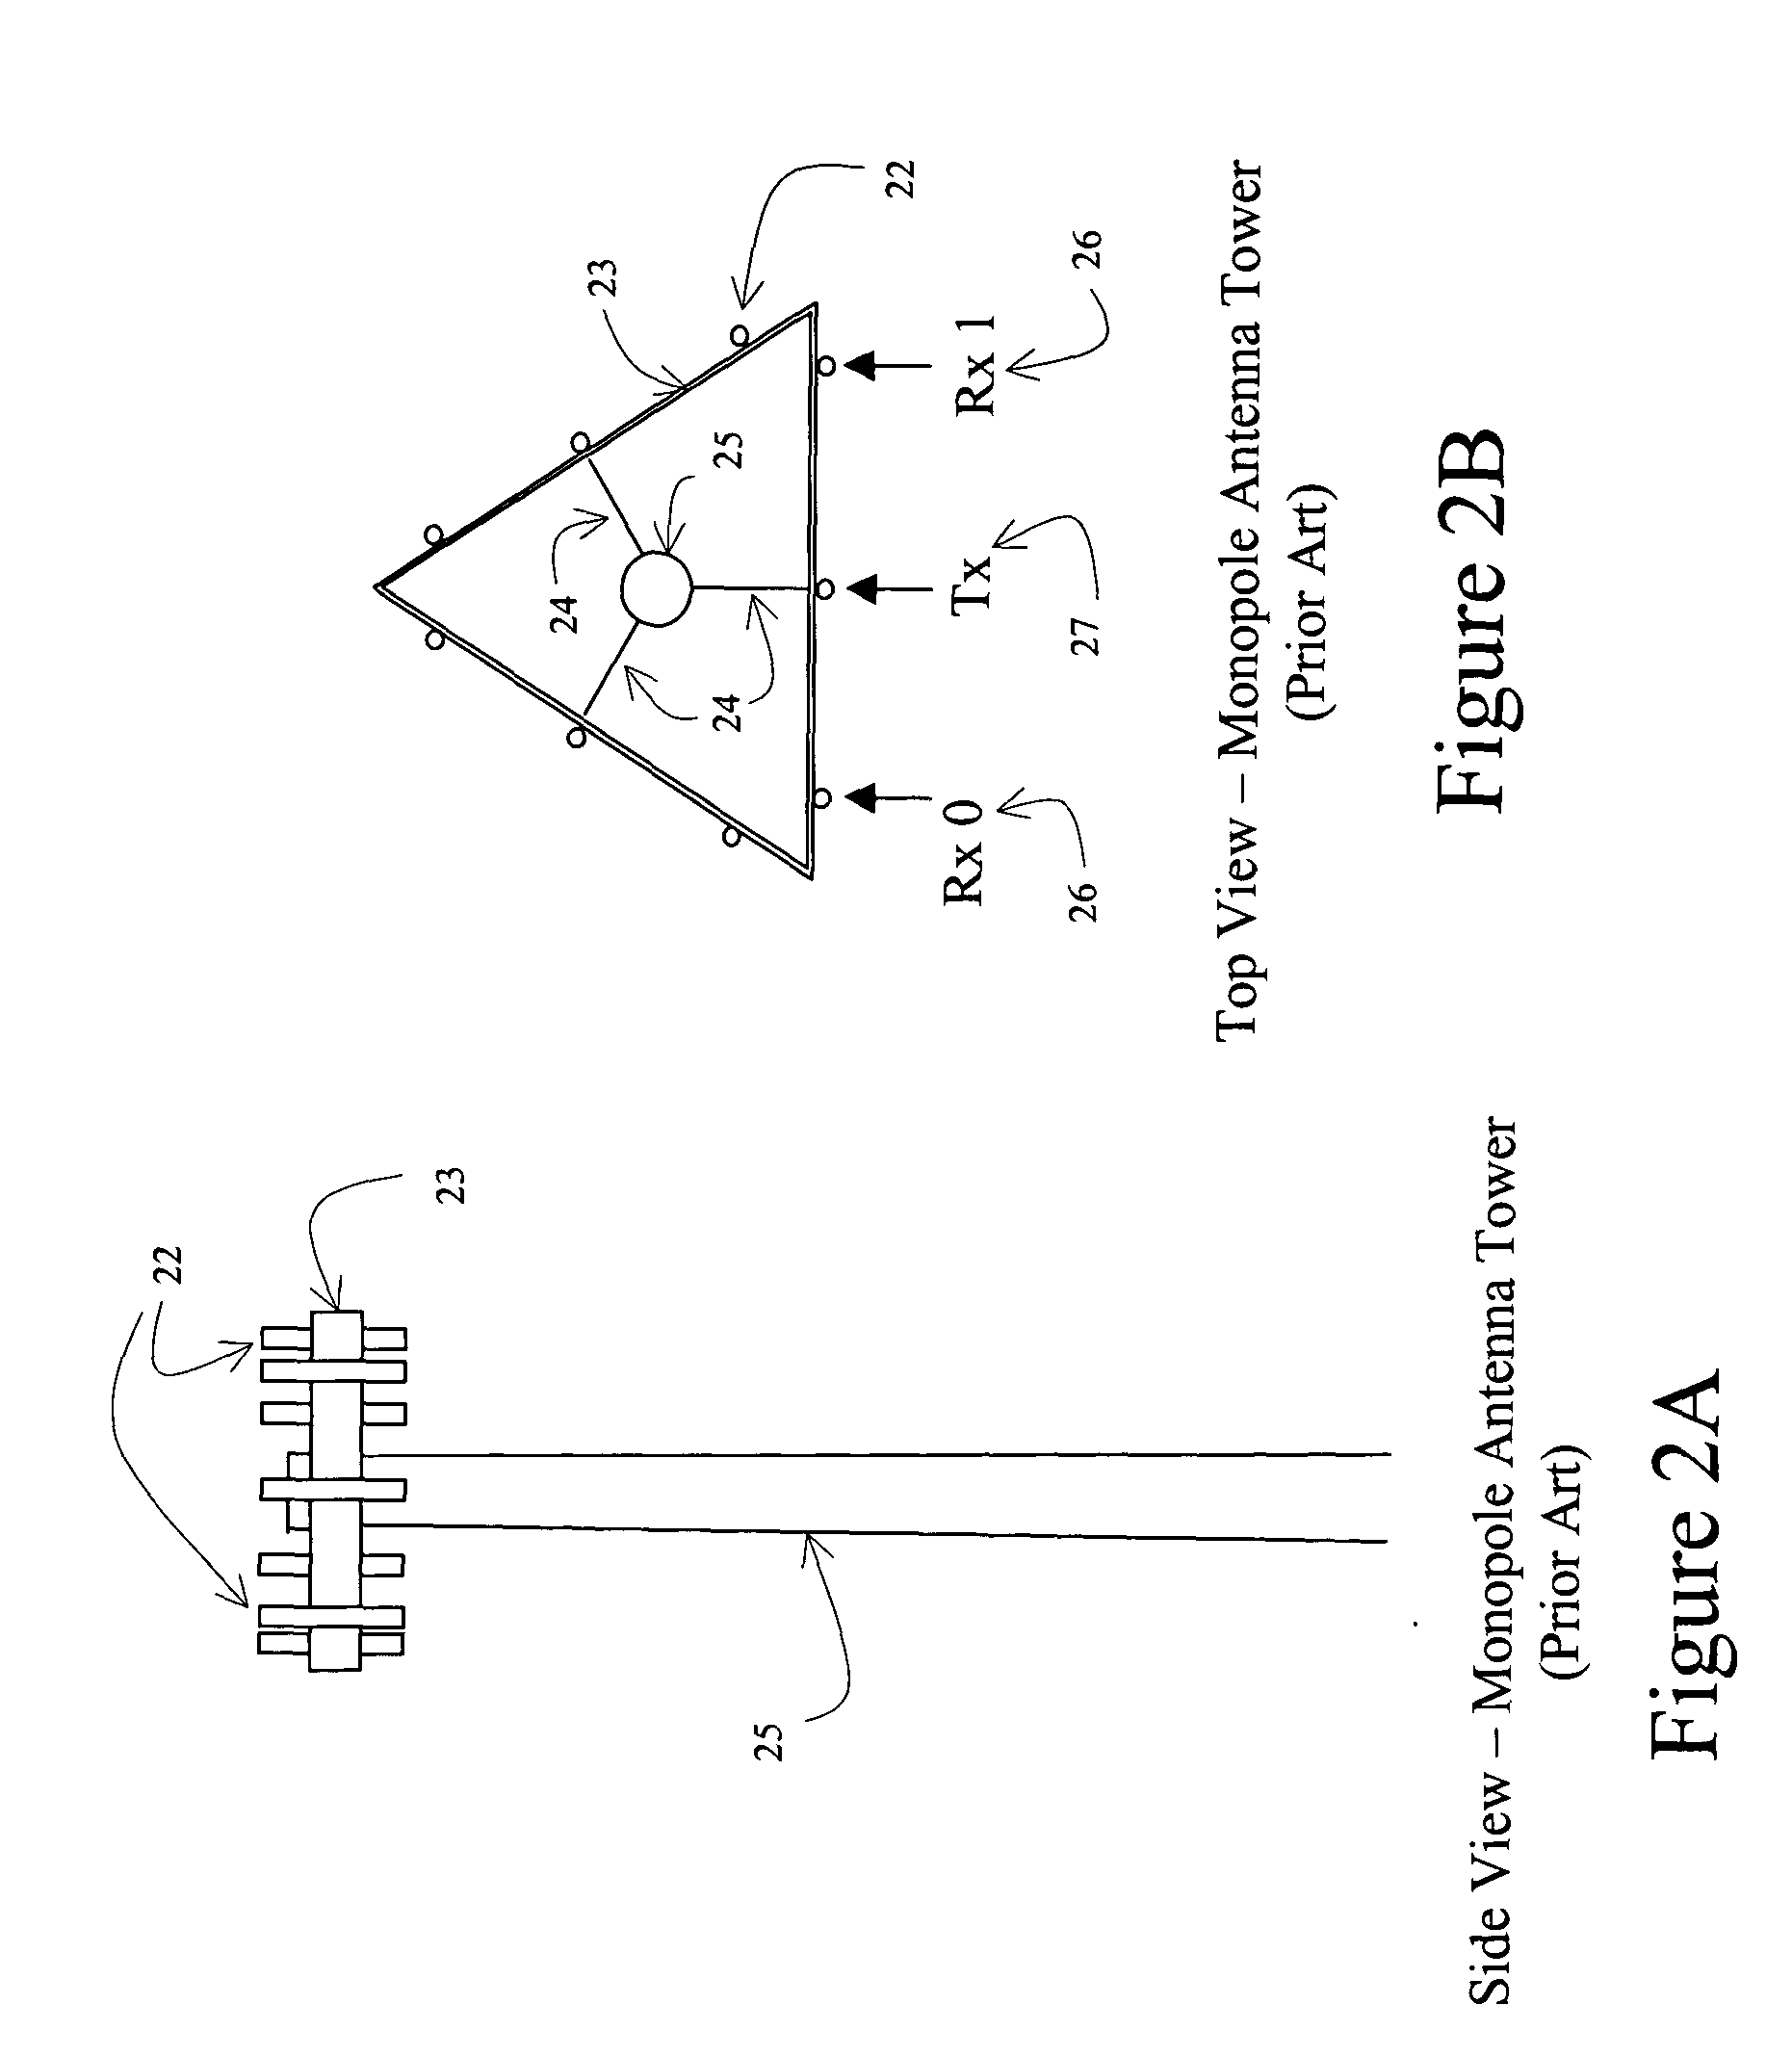 Systems and methods for billing a mobile wireless subscriber for fixed location service